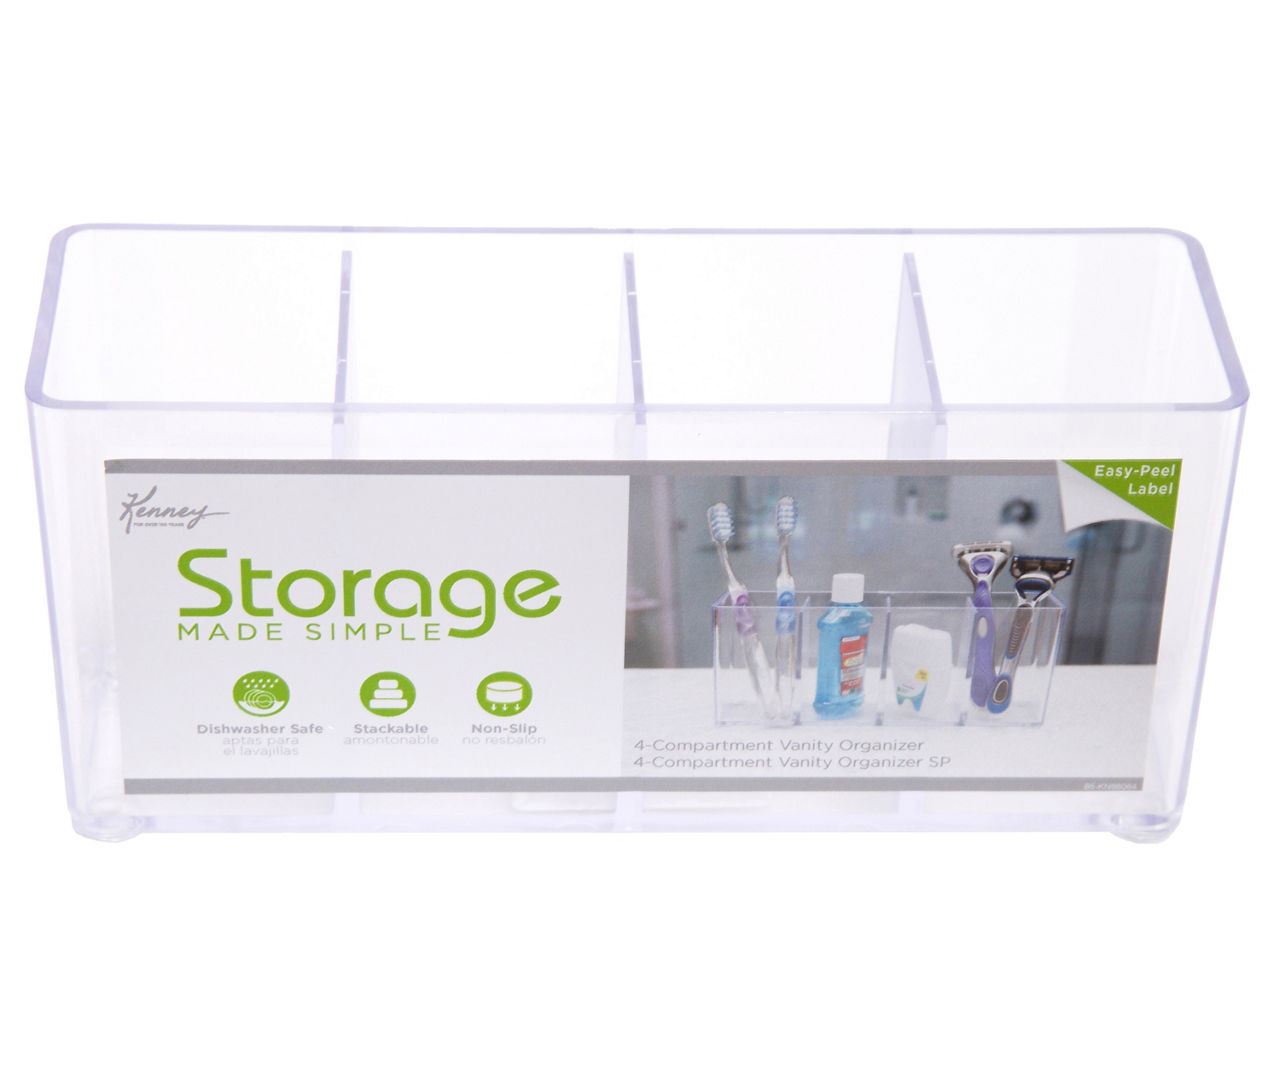 Kenney Storage Made Simple Clear 4-Compartment Bathroom Countertop